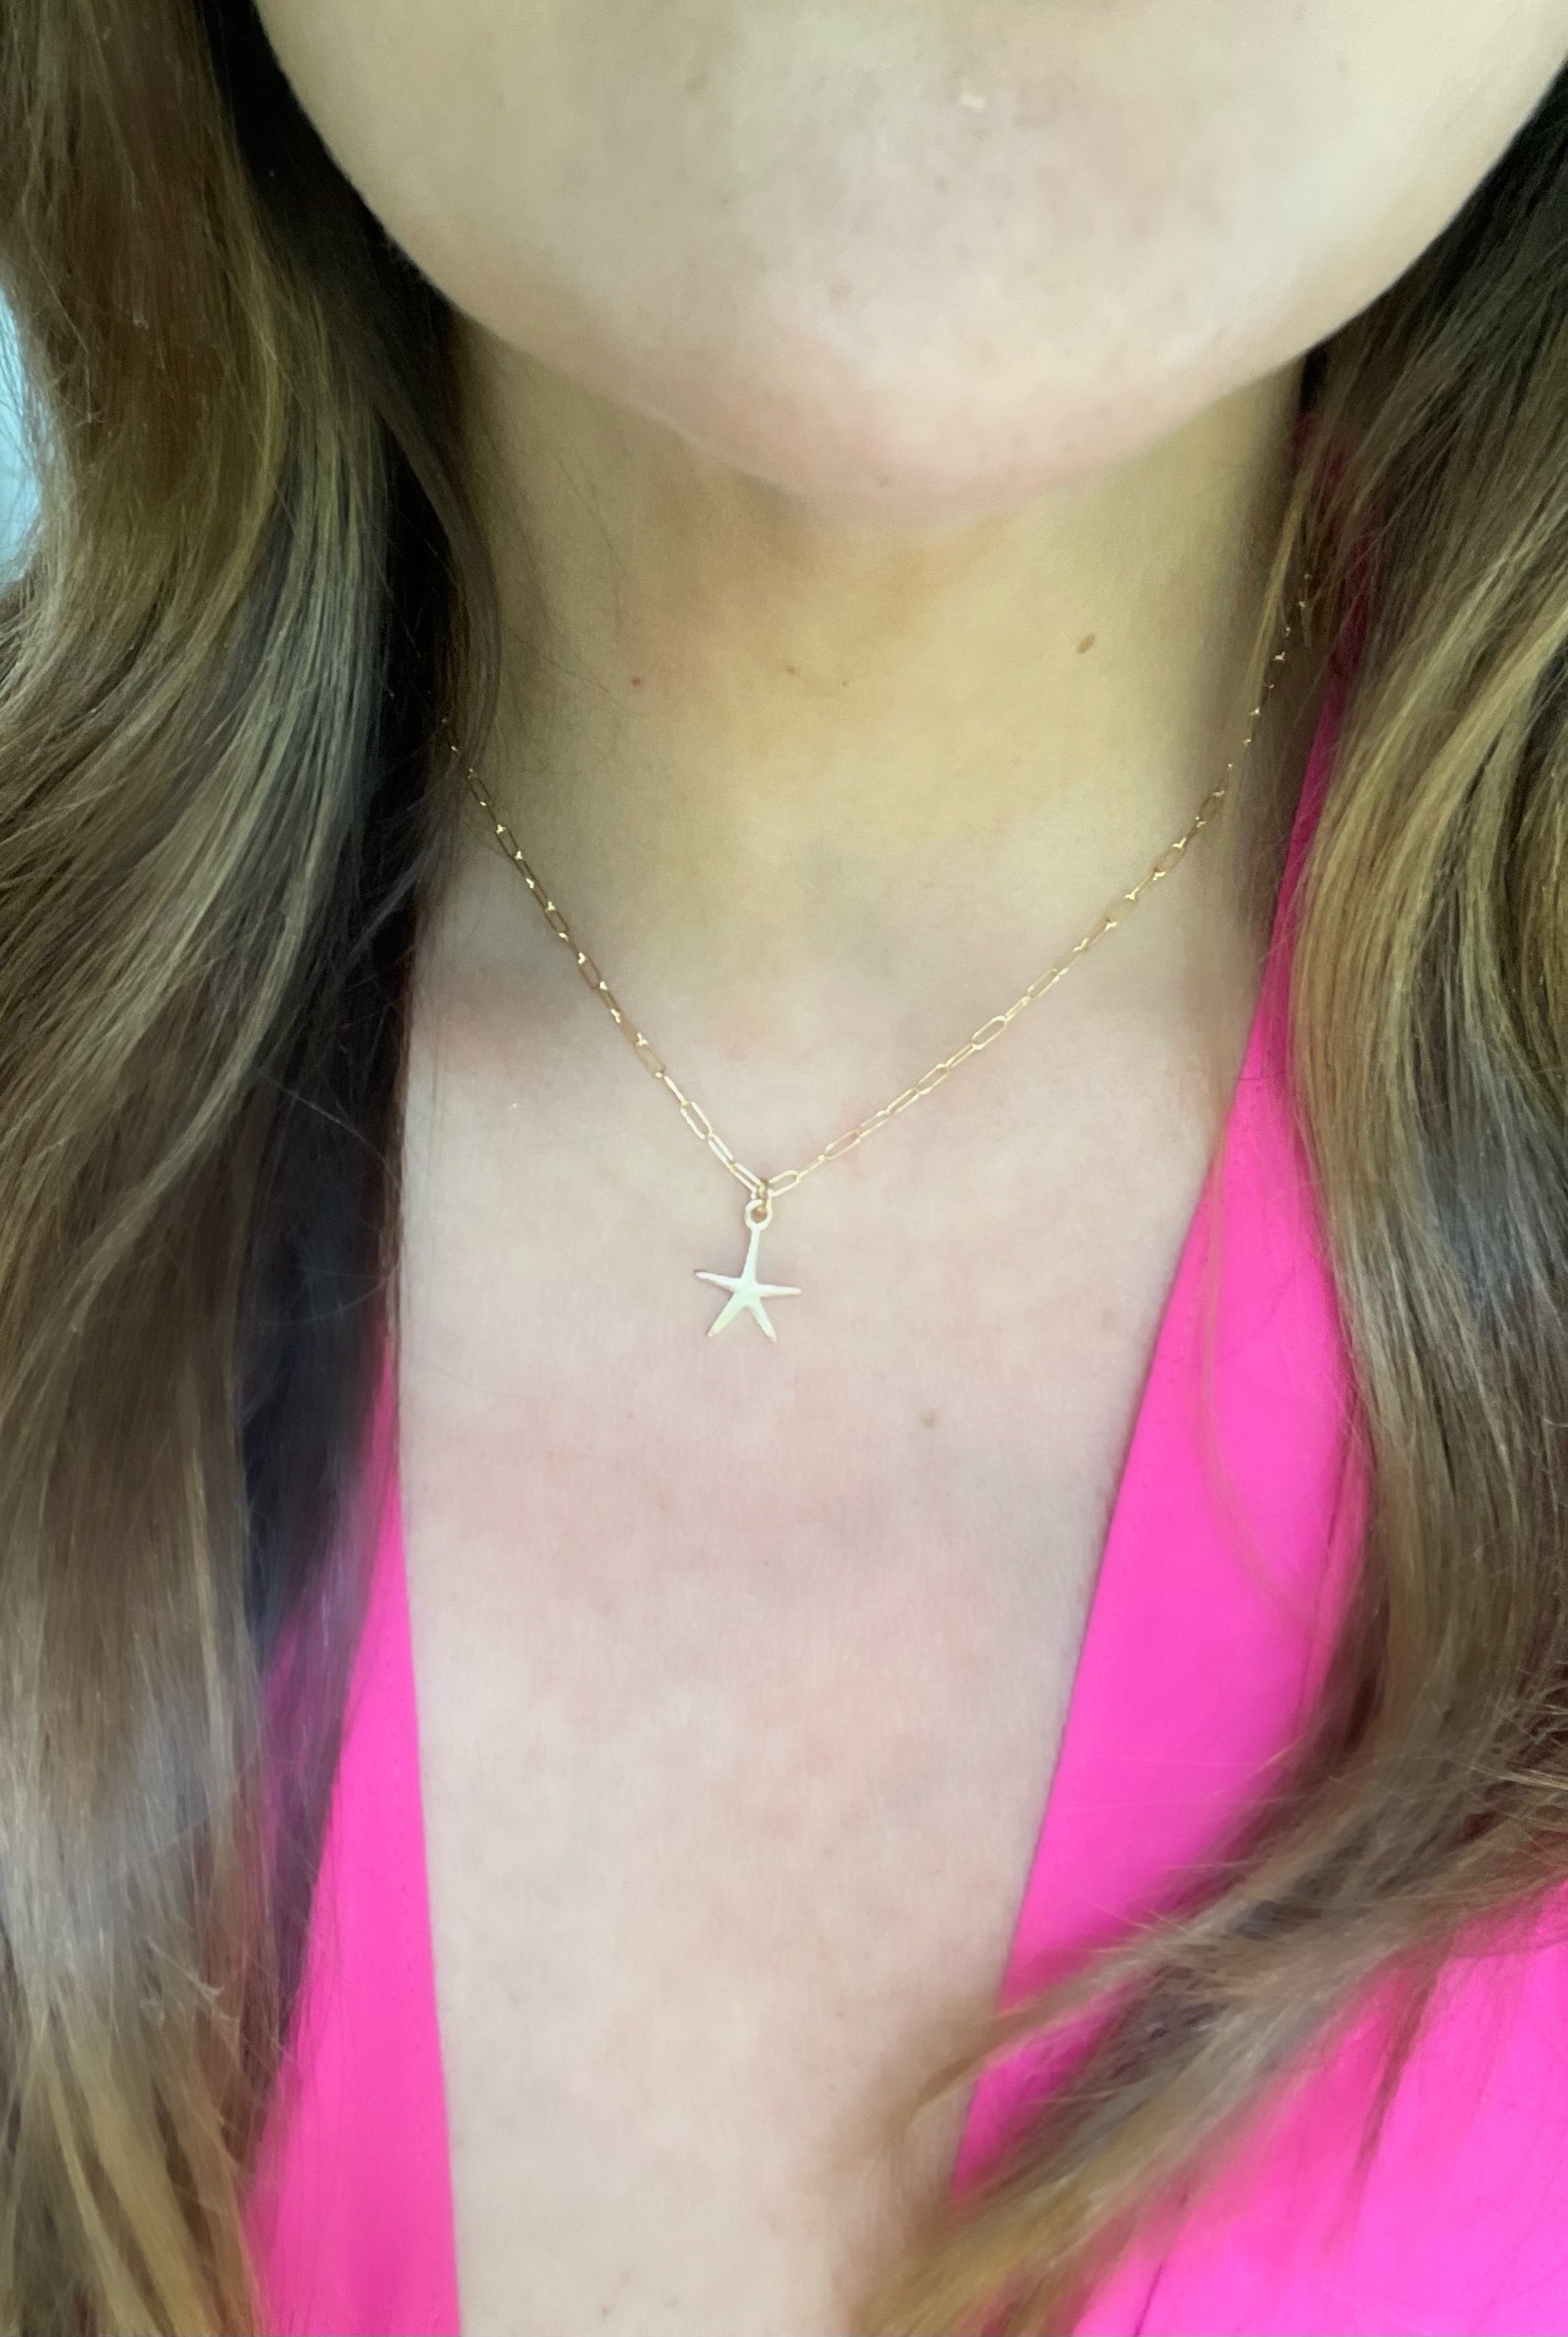 Starfish 18K Goldfill Necklace